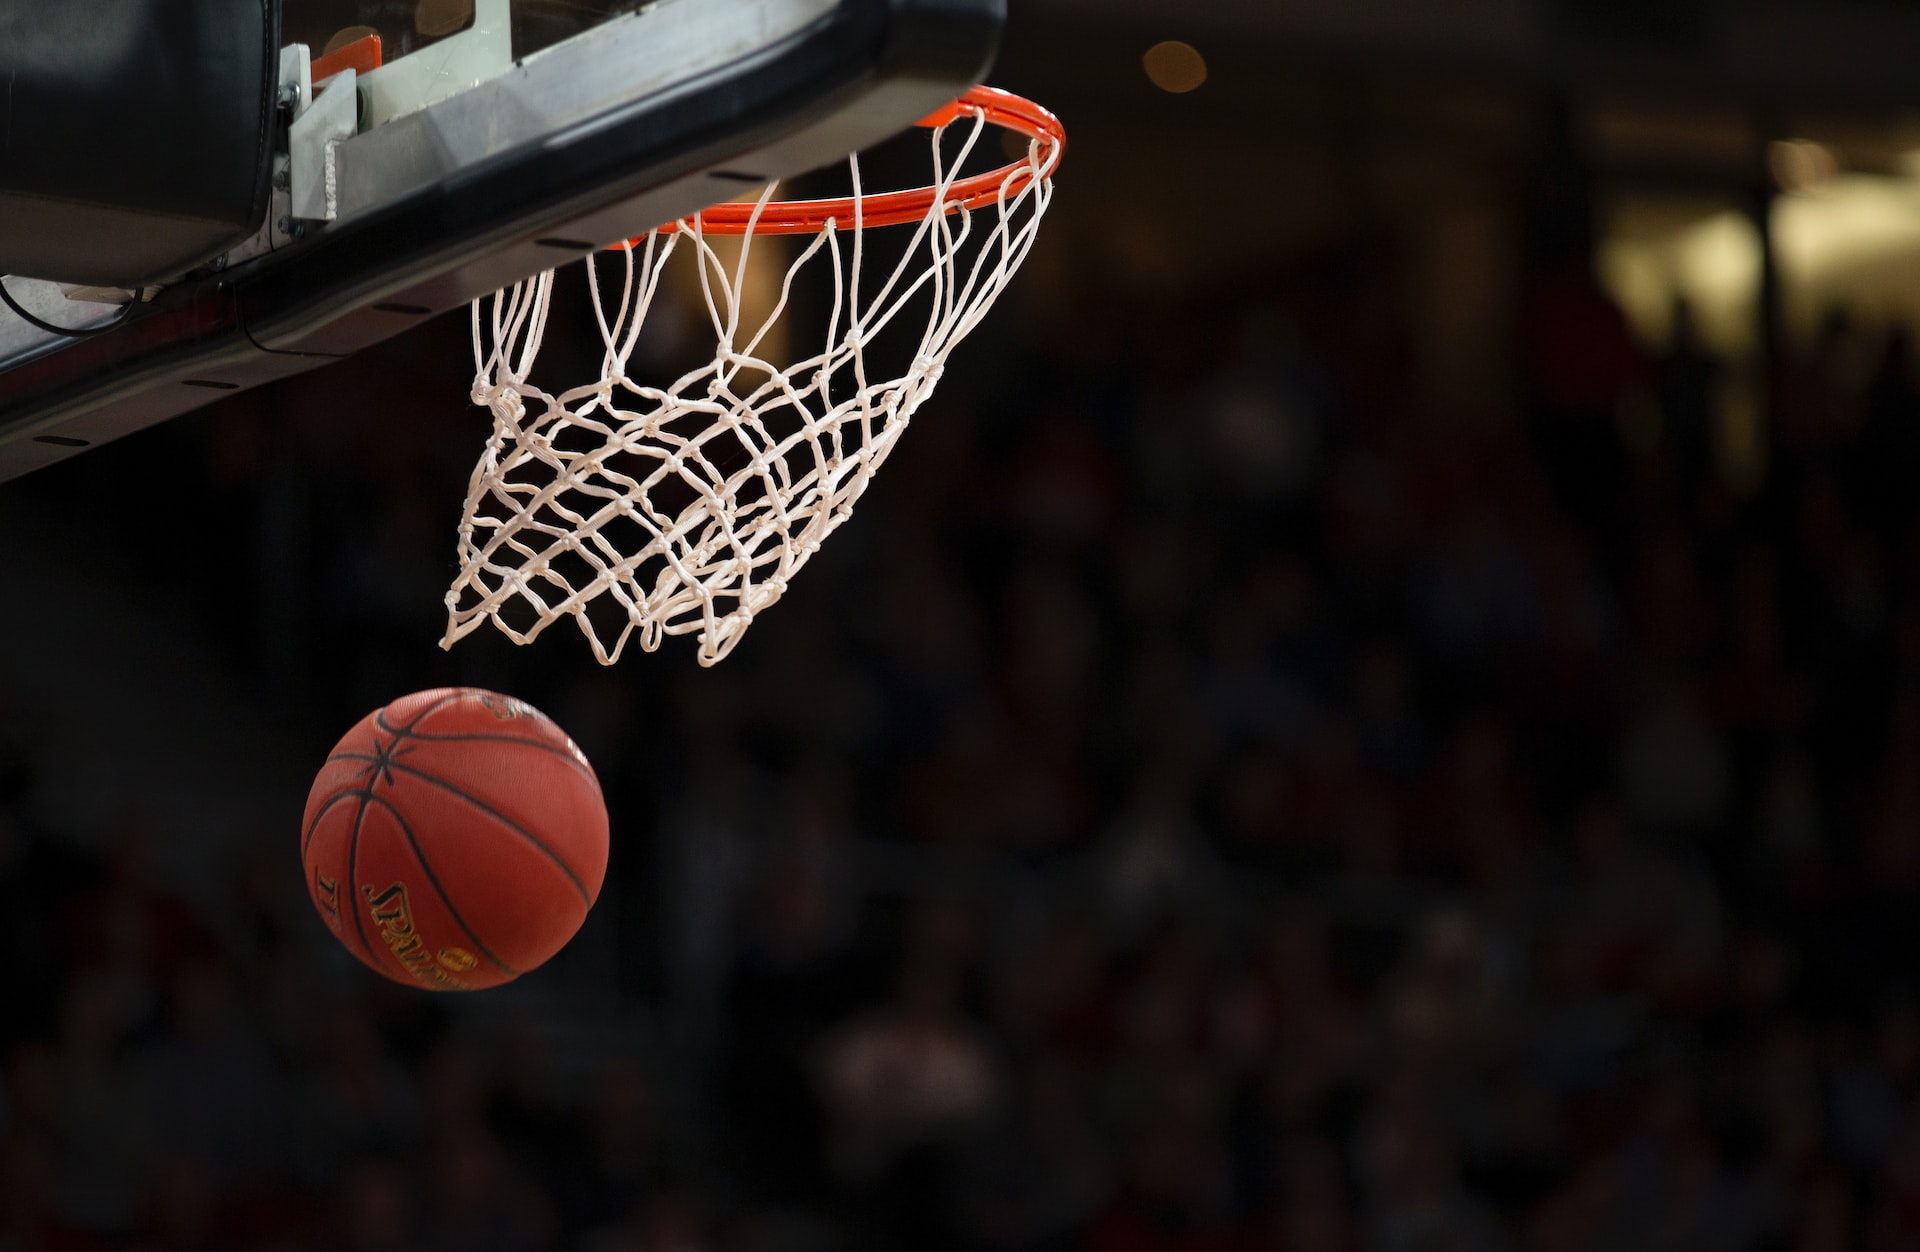 Featured image for “5 ways newsrooms can engage audiences with March Madness content”